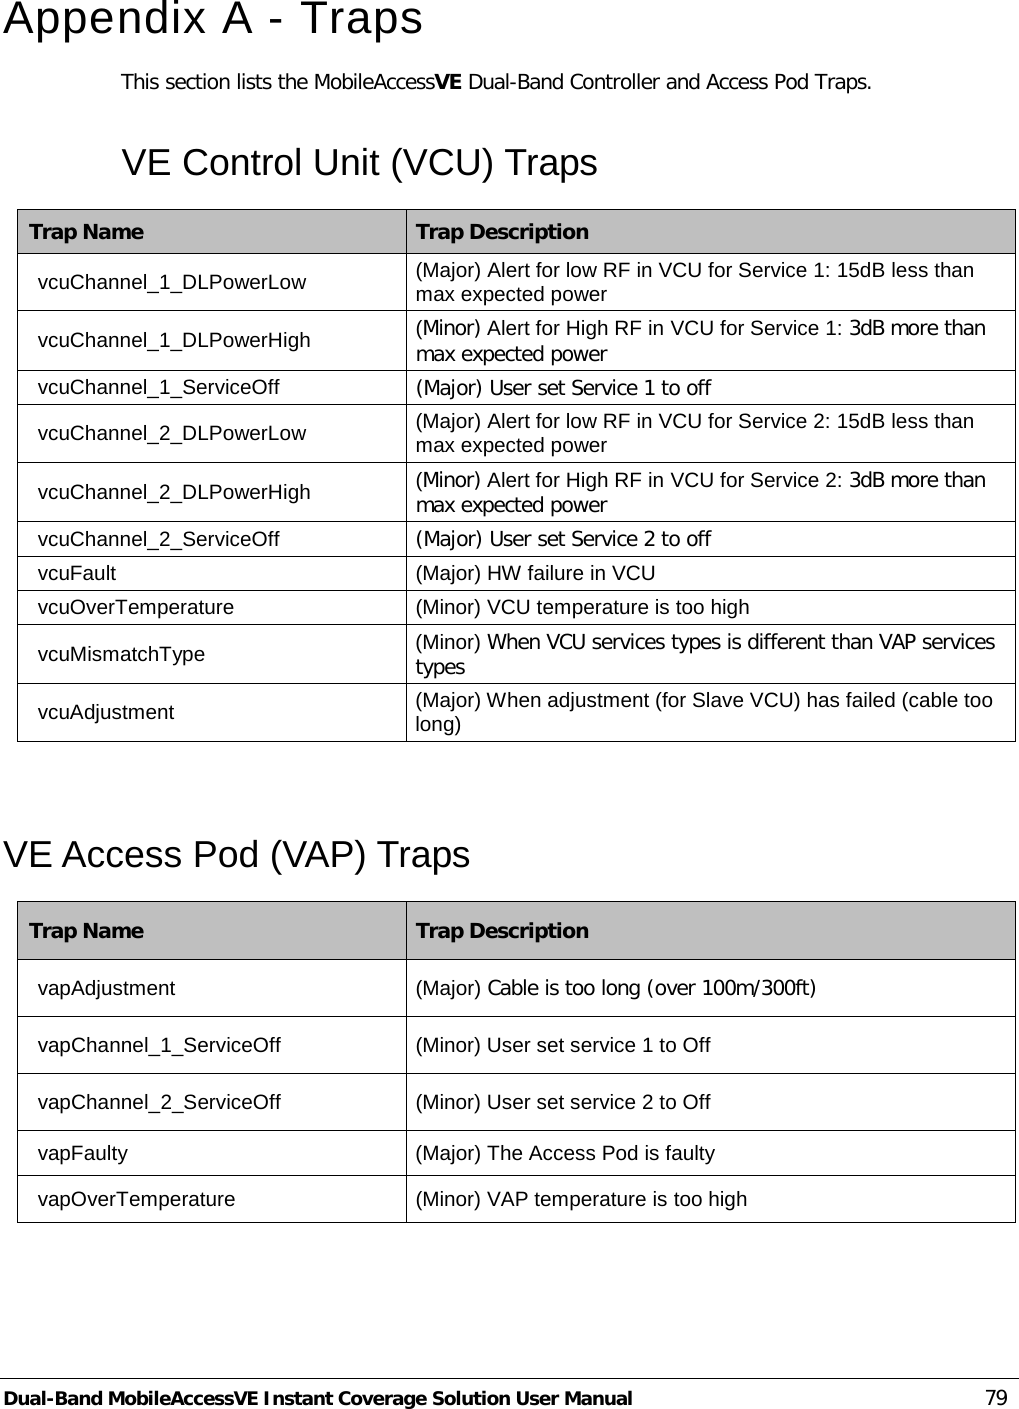  Dual-Band MobileAccessVE Instant Coverage Solution User Manual 79 Appendix A - Traps This section lists the MobileAccessVE Dual-Band Controller and Access Pod Traps. VE Control Unit (VCU) Traps Trap Name Trap Description vcuChannel_1_DLPowerLow (Major) Alert for low RF in VCU for Service 1: 15dB less than max expected power vcuChannel_1_DLPowerHigh (Minor) Alert for High RF in VCU for Service 1: 3dB more than max expected power vcuChannel_1_ServiceOff (Major) User set Service 1 to off vcuChannel_2_DLPowerLow (Major) Alert for low RF in VCU for Service 2: 15dB less than max expected power vcuChannel_2_DLPowerHigh (Minor) Alert for High RF in VCU for Service 2: 3dB more than max expected power vcuChannel_2_ServiceOff (Major) User set Service 2 to off vcuFault (Major) HW failure in VCU vcuOverTemperature (Minor) VCU temperature is too high vcuMismatchType (Minor) When VCU services types is different than VAP services types vcuAdjustment (Major) When adjustment (for Slave VCU) has failed (cable too long)  VE Access Pod (VAP) Traps Trap Name Trap Description vapAdjustment (Major) Cable is too long (over 100m/300ft) vapChannel_1_ServiceOff (Minor) User set service 1 to Off vapChannel_2_ServiceOff (Minor) User set service 2 to Off vapFaulty  (Major) The Access Pod is faulty vapOverTemperature (Minor) VAP temperature is too high  